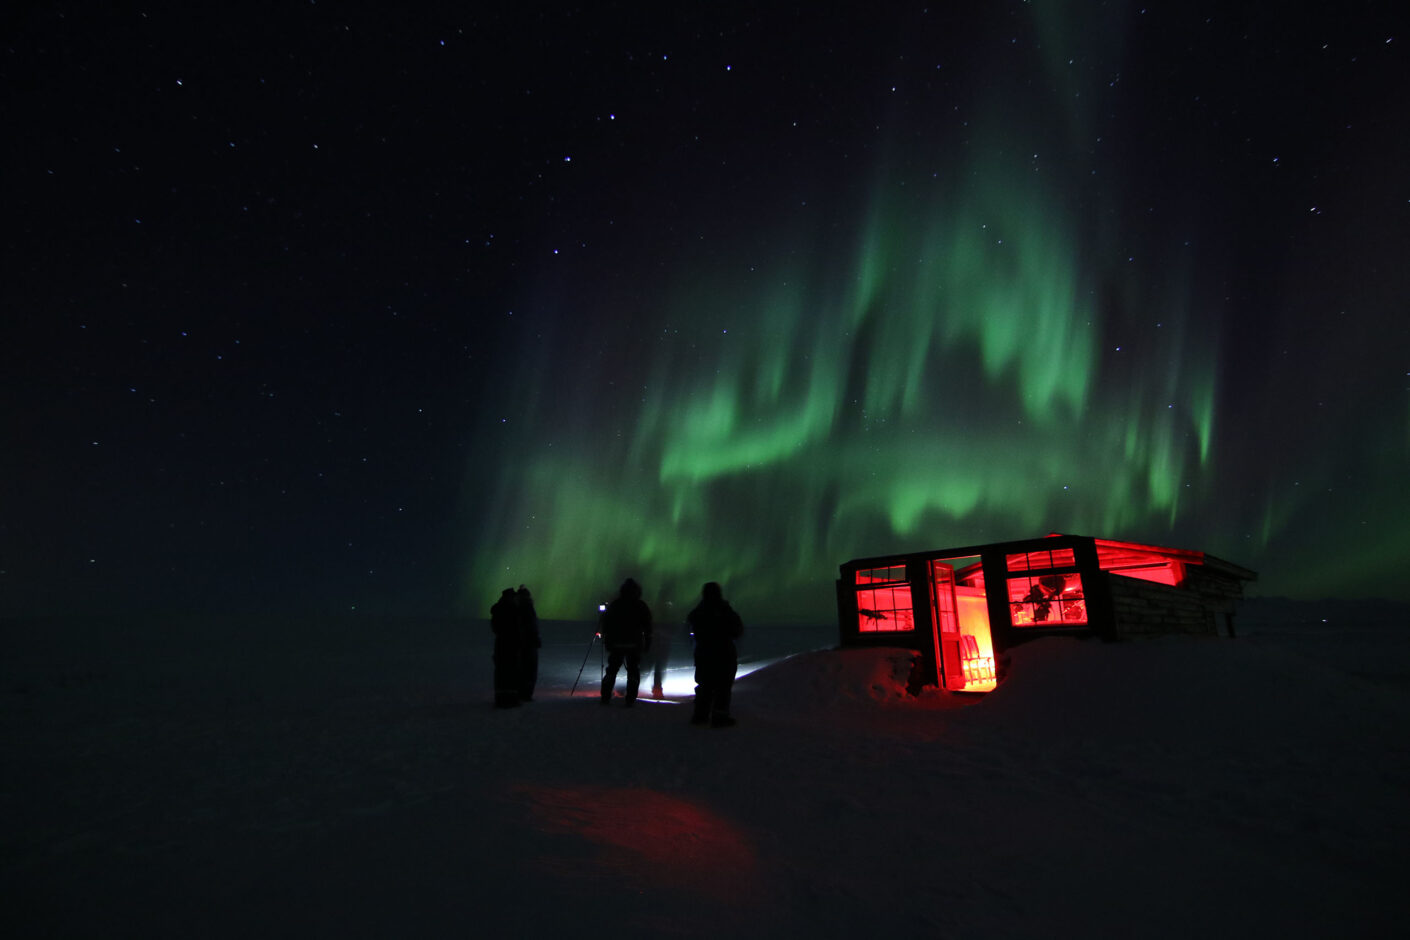 Day Three Hotel Rangá Stargazing observatory with Northern Lights above